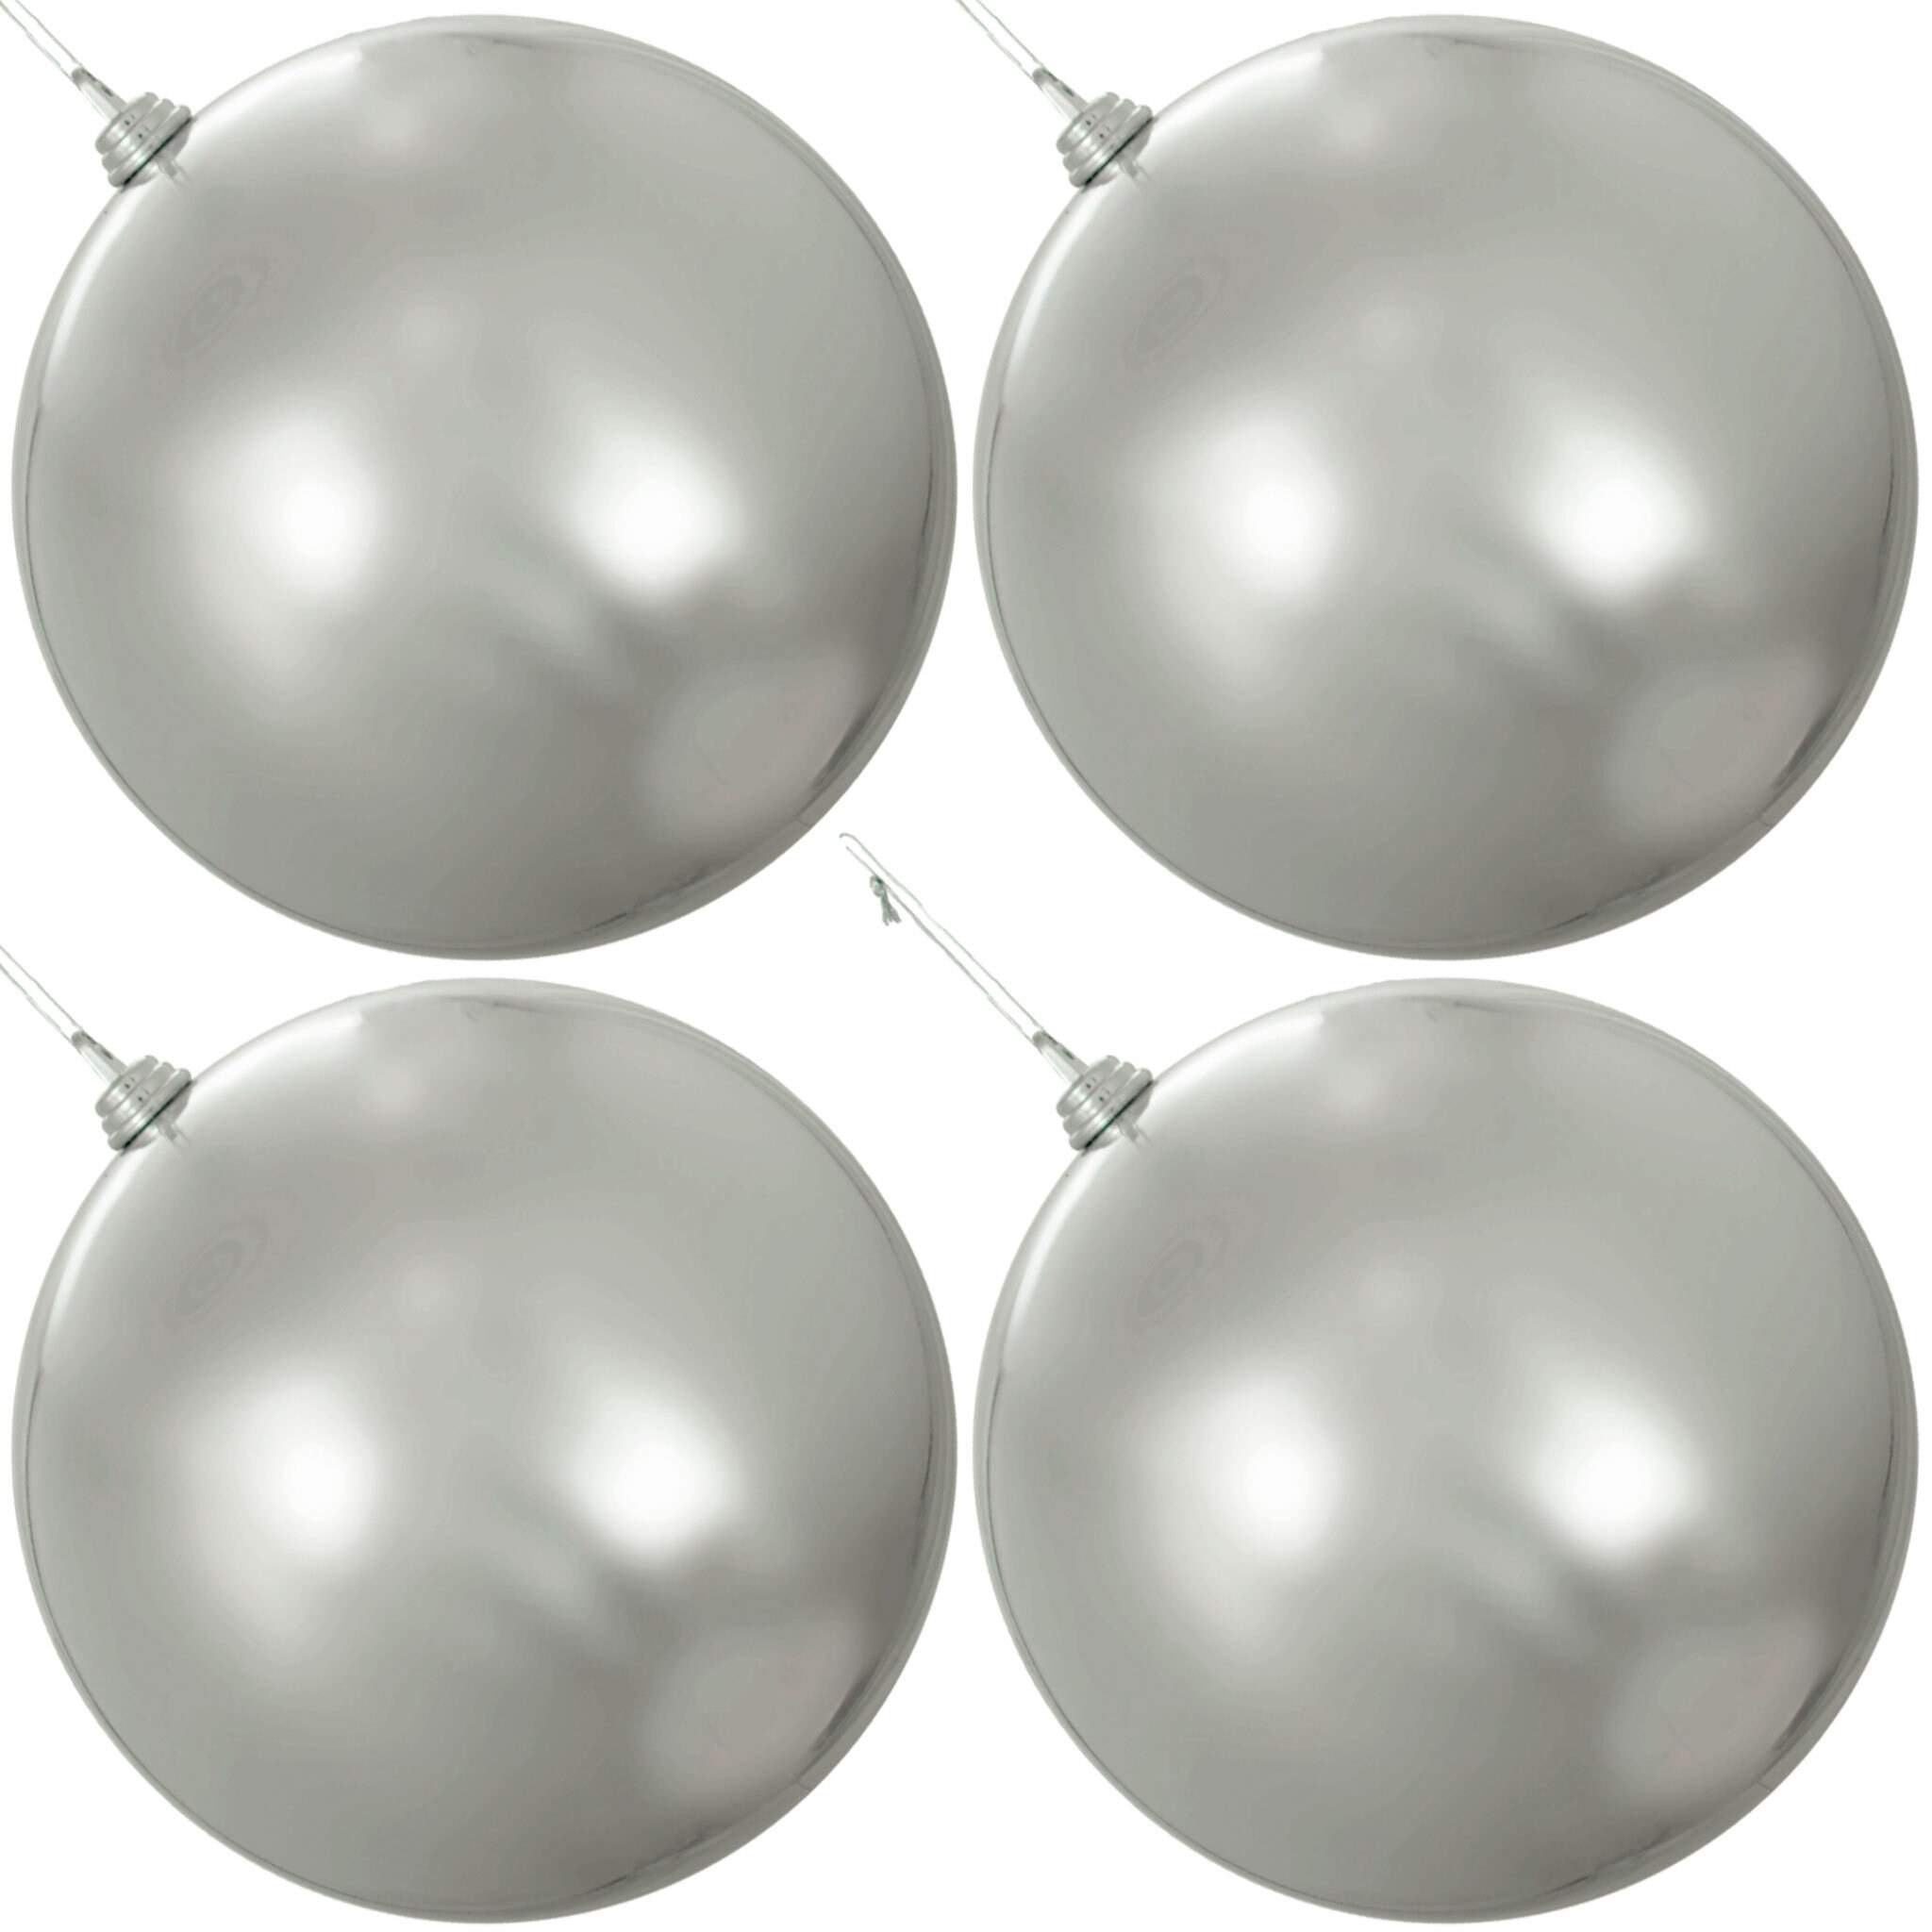 Glitter Silver Ball Ornaments Holiday Decorations on Sale Lee Display 8in